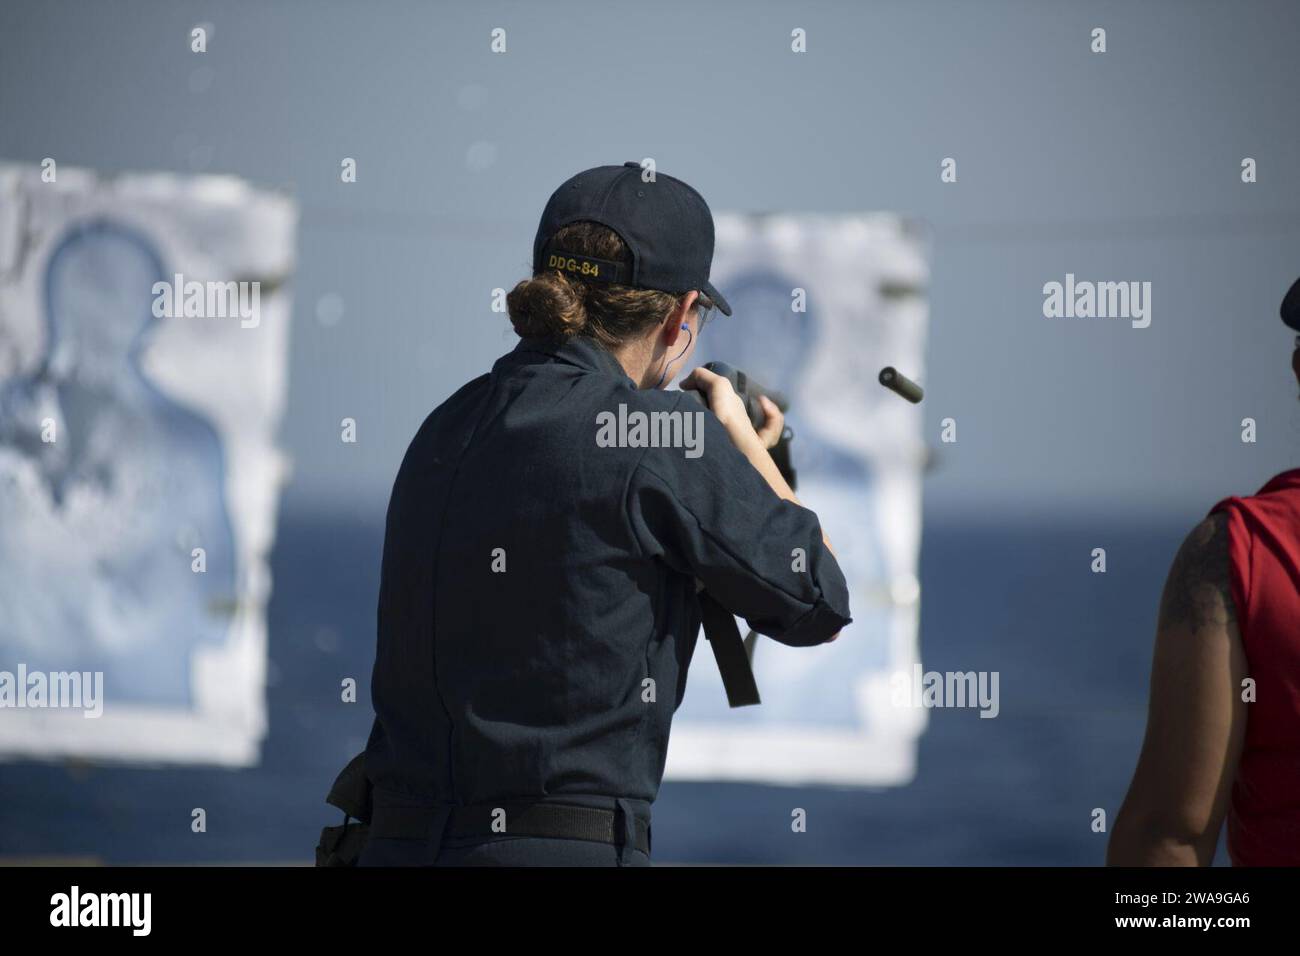 US military forces. 180923EV253-226 MEDITERRANEAN SEA (Sept. 23, 2018) Operations Specialist 2nd Class Annie Sabourin fires an M500 shotgun during a live-fire exercise aboard the Arleigh Burke-class guided-missile destroyer USS Bulkeley (DDG 84) Sept. 23, 2018. Bulkeley, homeported at Naval Station Norfolk, is conducting naval operations in the U.S. 6th Fleet area of operations in support of U.S. national security interests in Europe and Africa. (U.S. Navy photo by Mass Communication Specialist 3rd Class Sara Eshleman/Released) Stock Photo